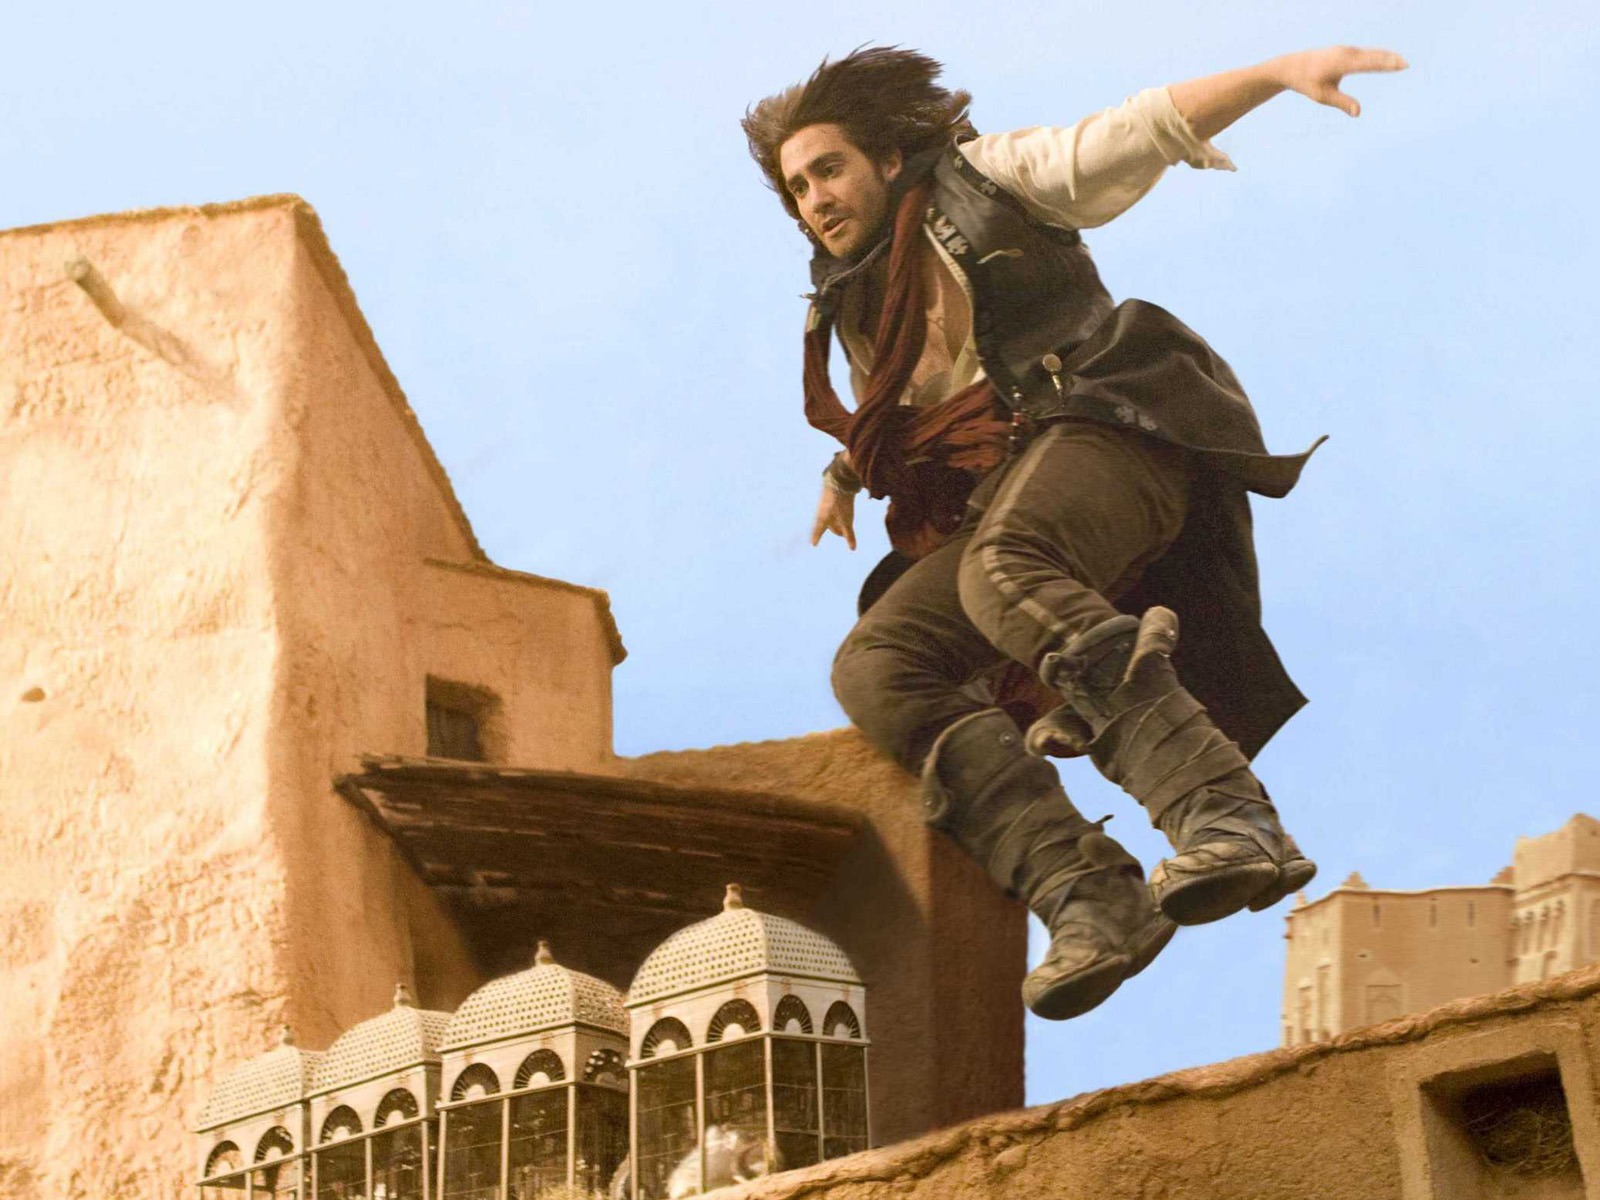 Prince of Persia The Sands of Time 波斯王子：時之刃 #12 - 1600x1200